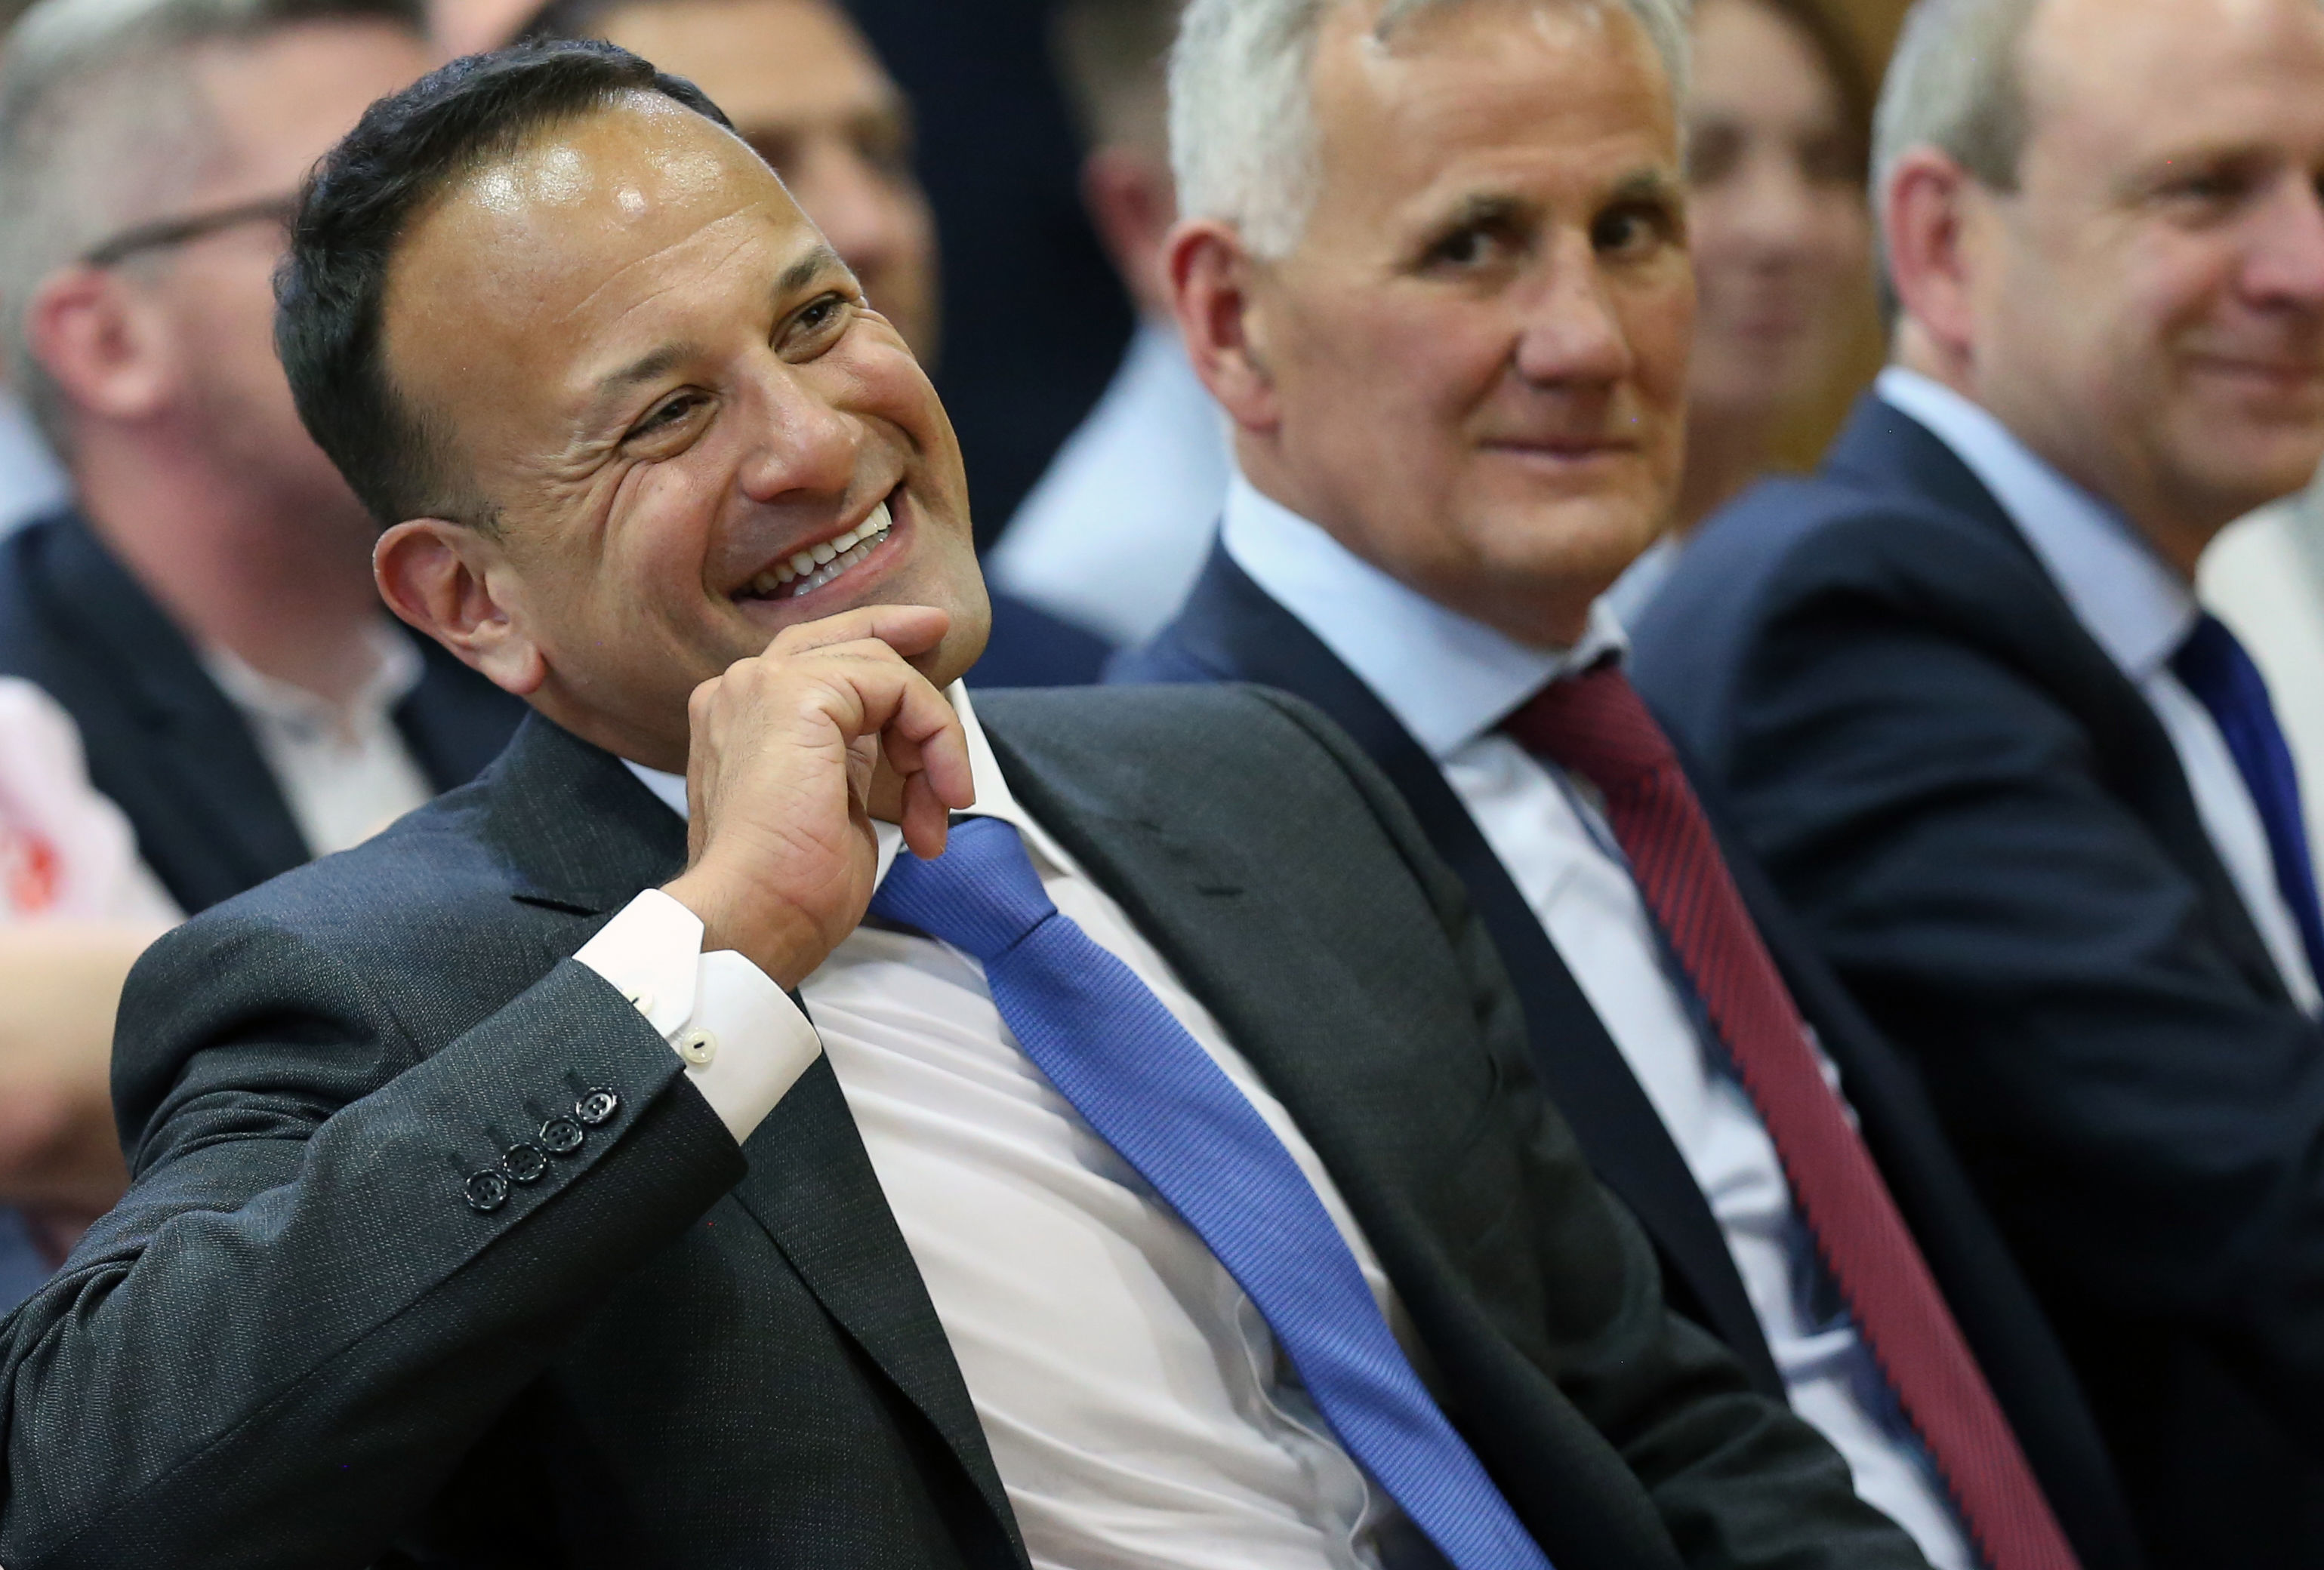 Catholic hospitals in Ireland will have to carry out abortions, says Irish PM